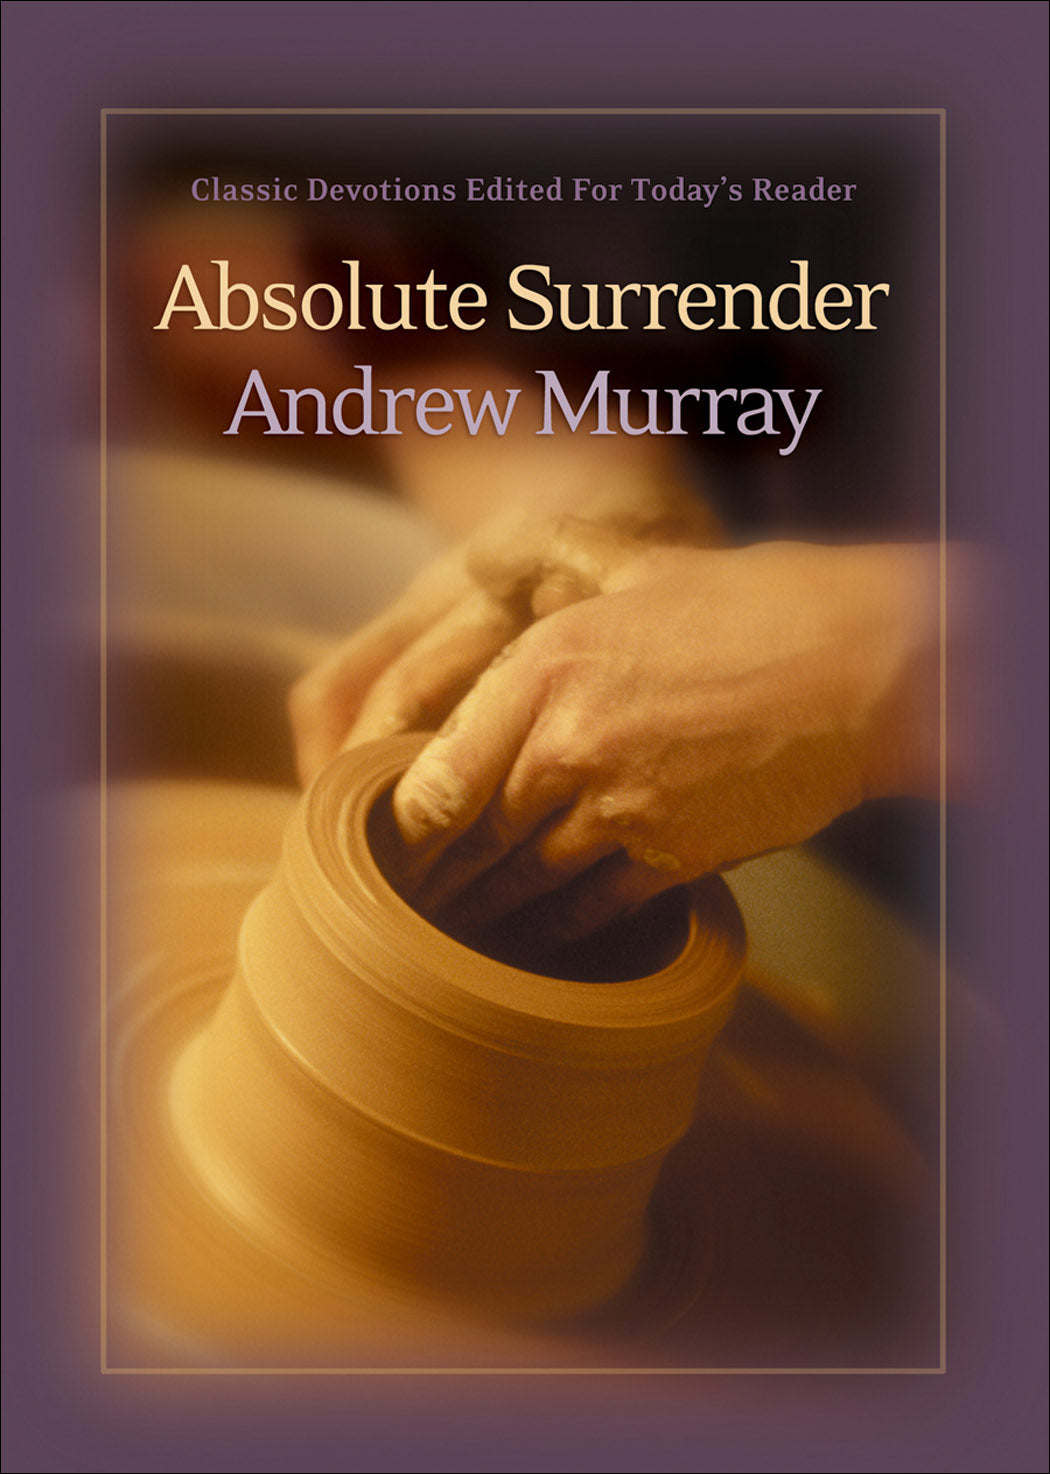 Image of Absolute Surrender other